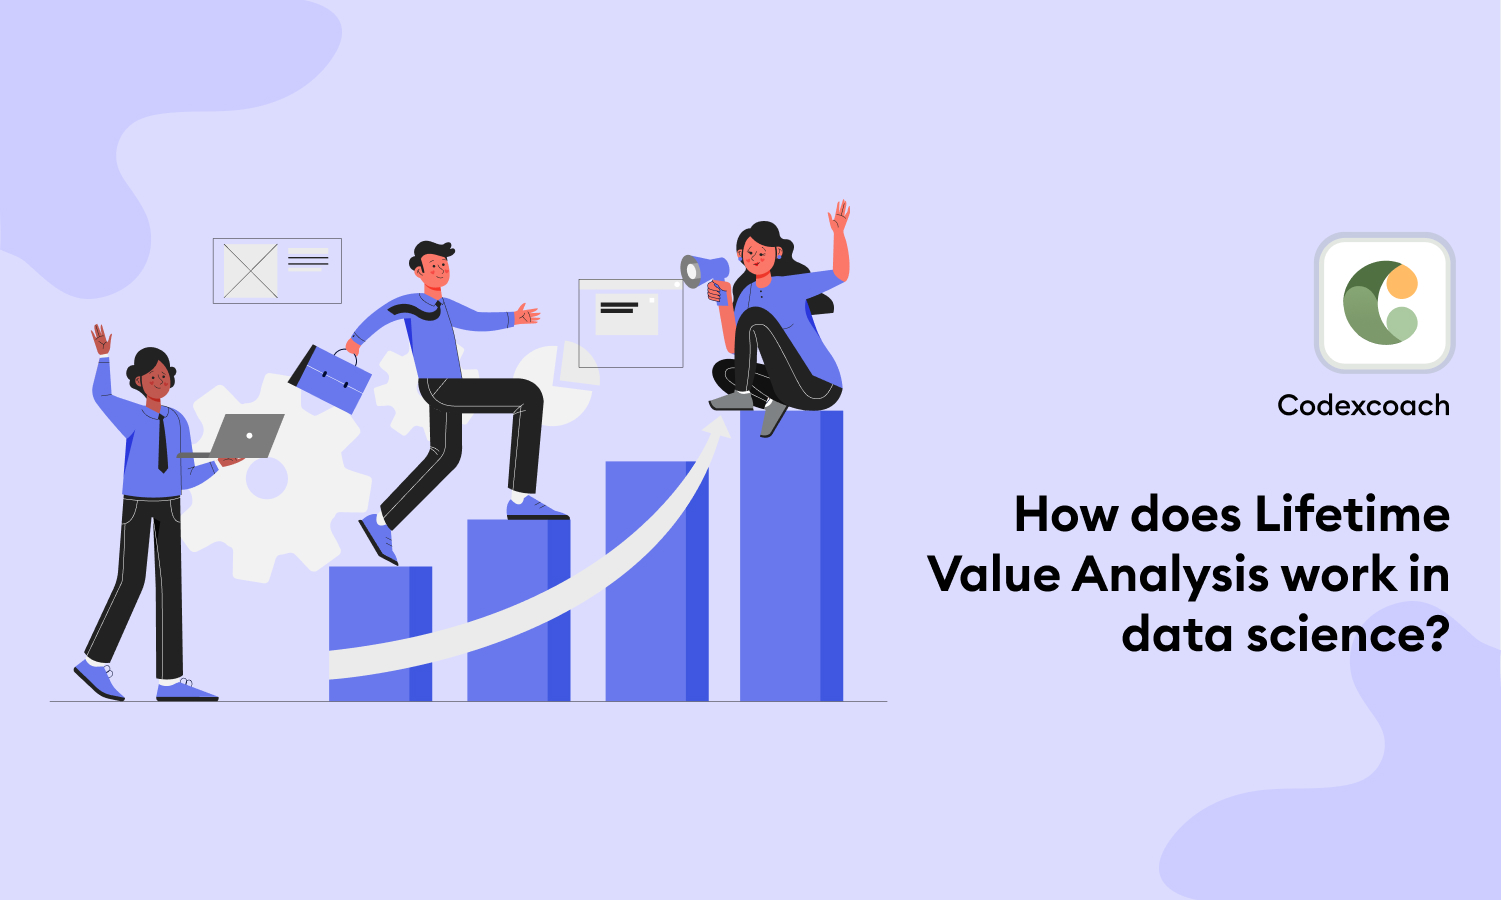 How does Lifetime Value Analysis work in data science?